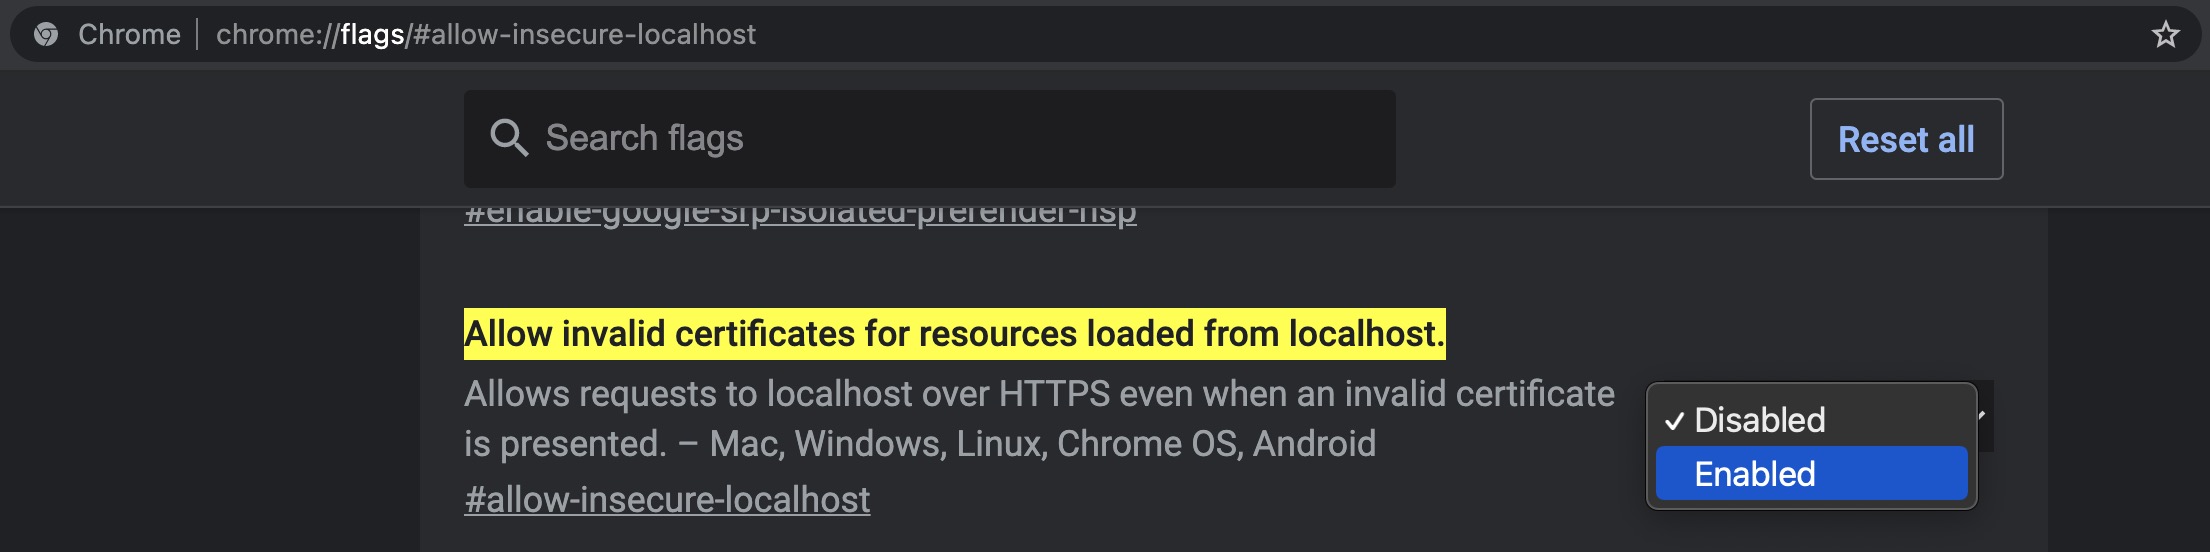 Allow invalid certificates for resources loaded from localhost